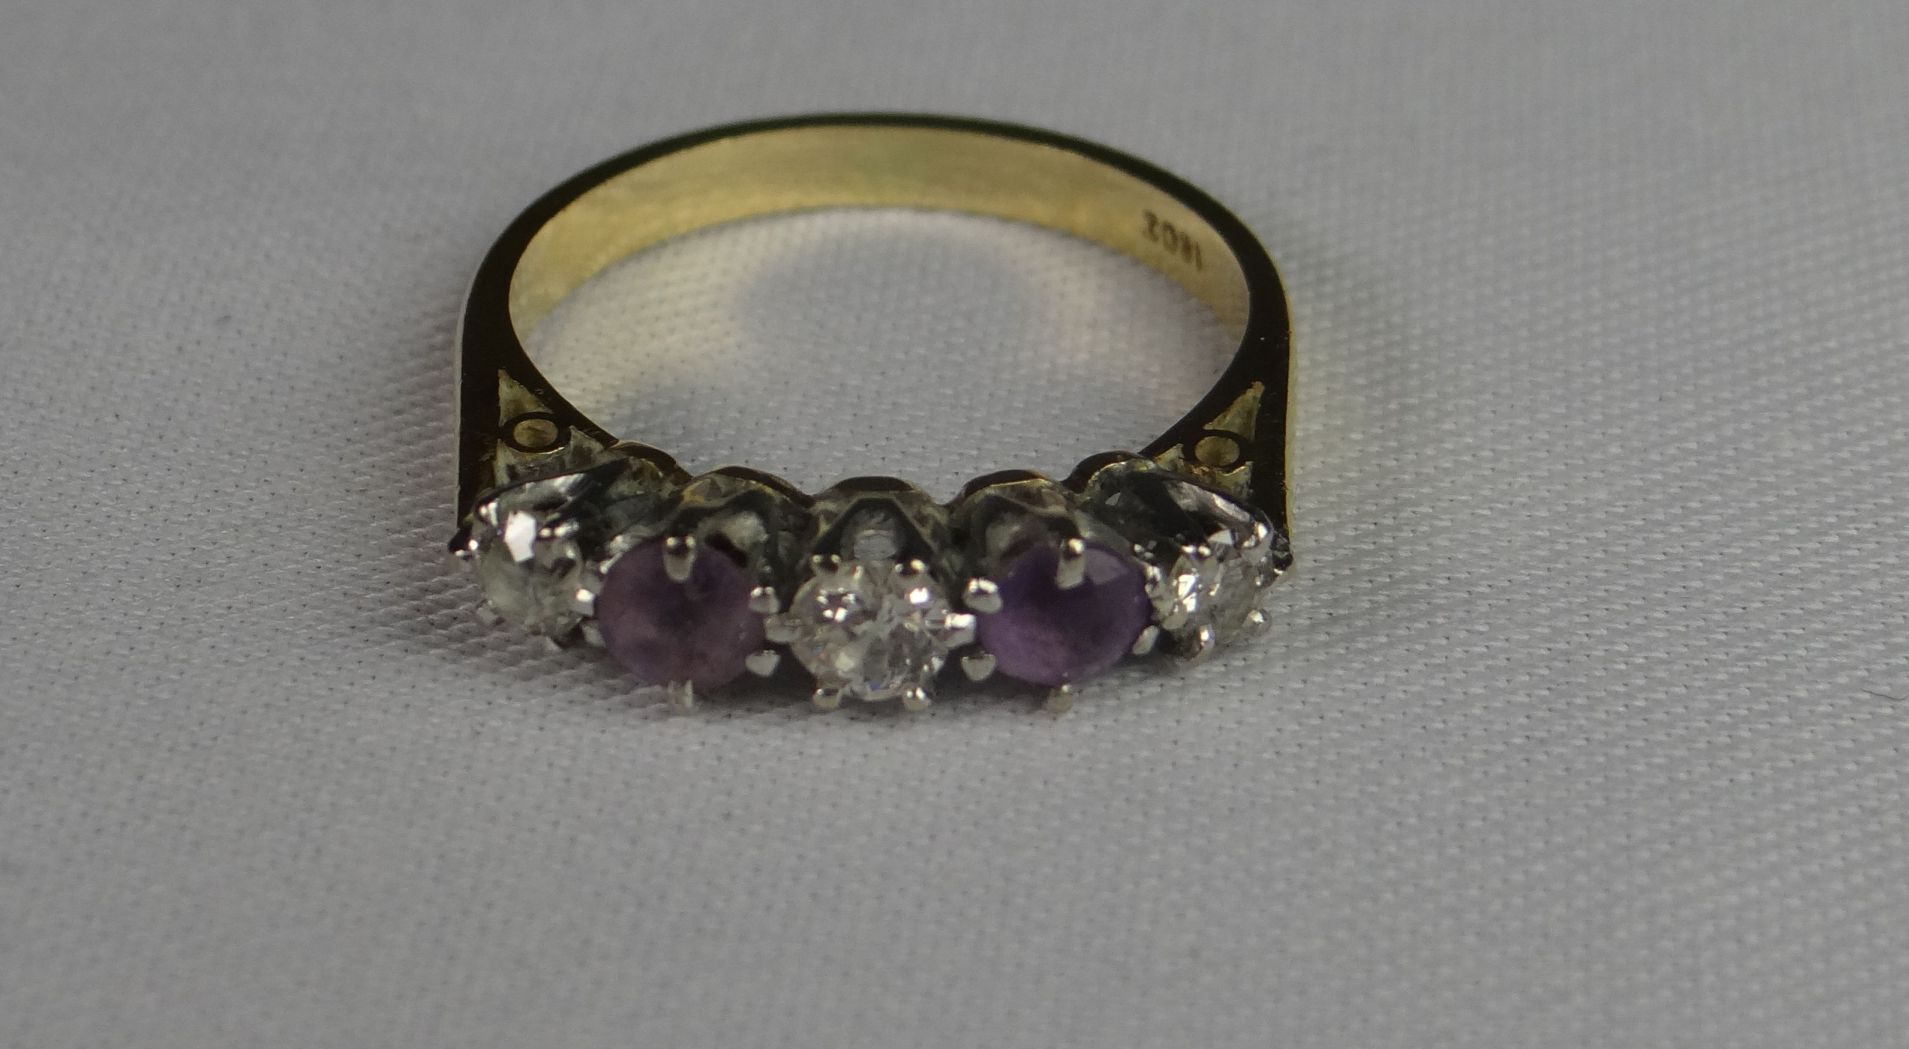 An 18ct yellow gold ring with three small diamonds and two amethysts